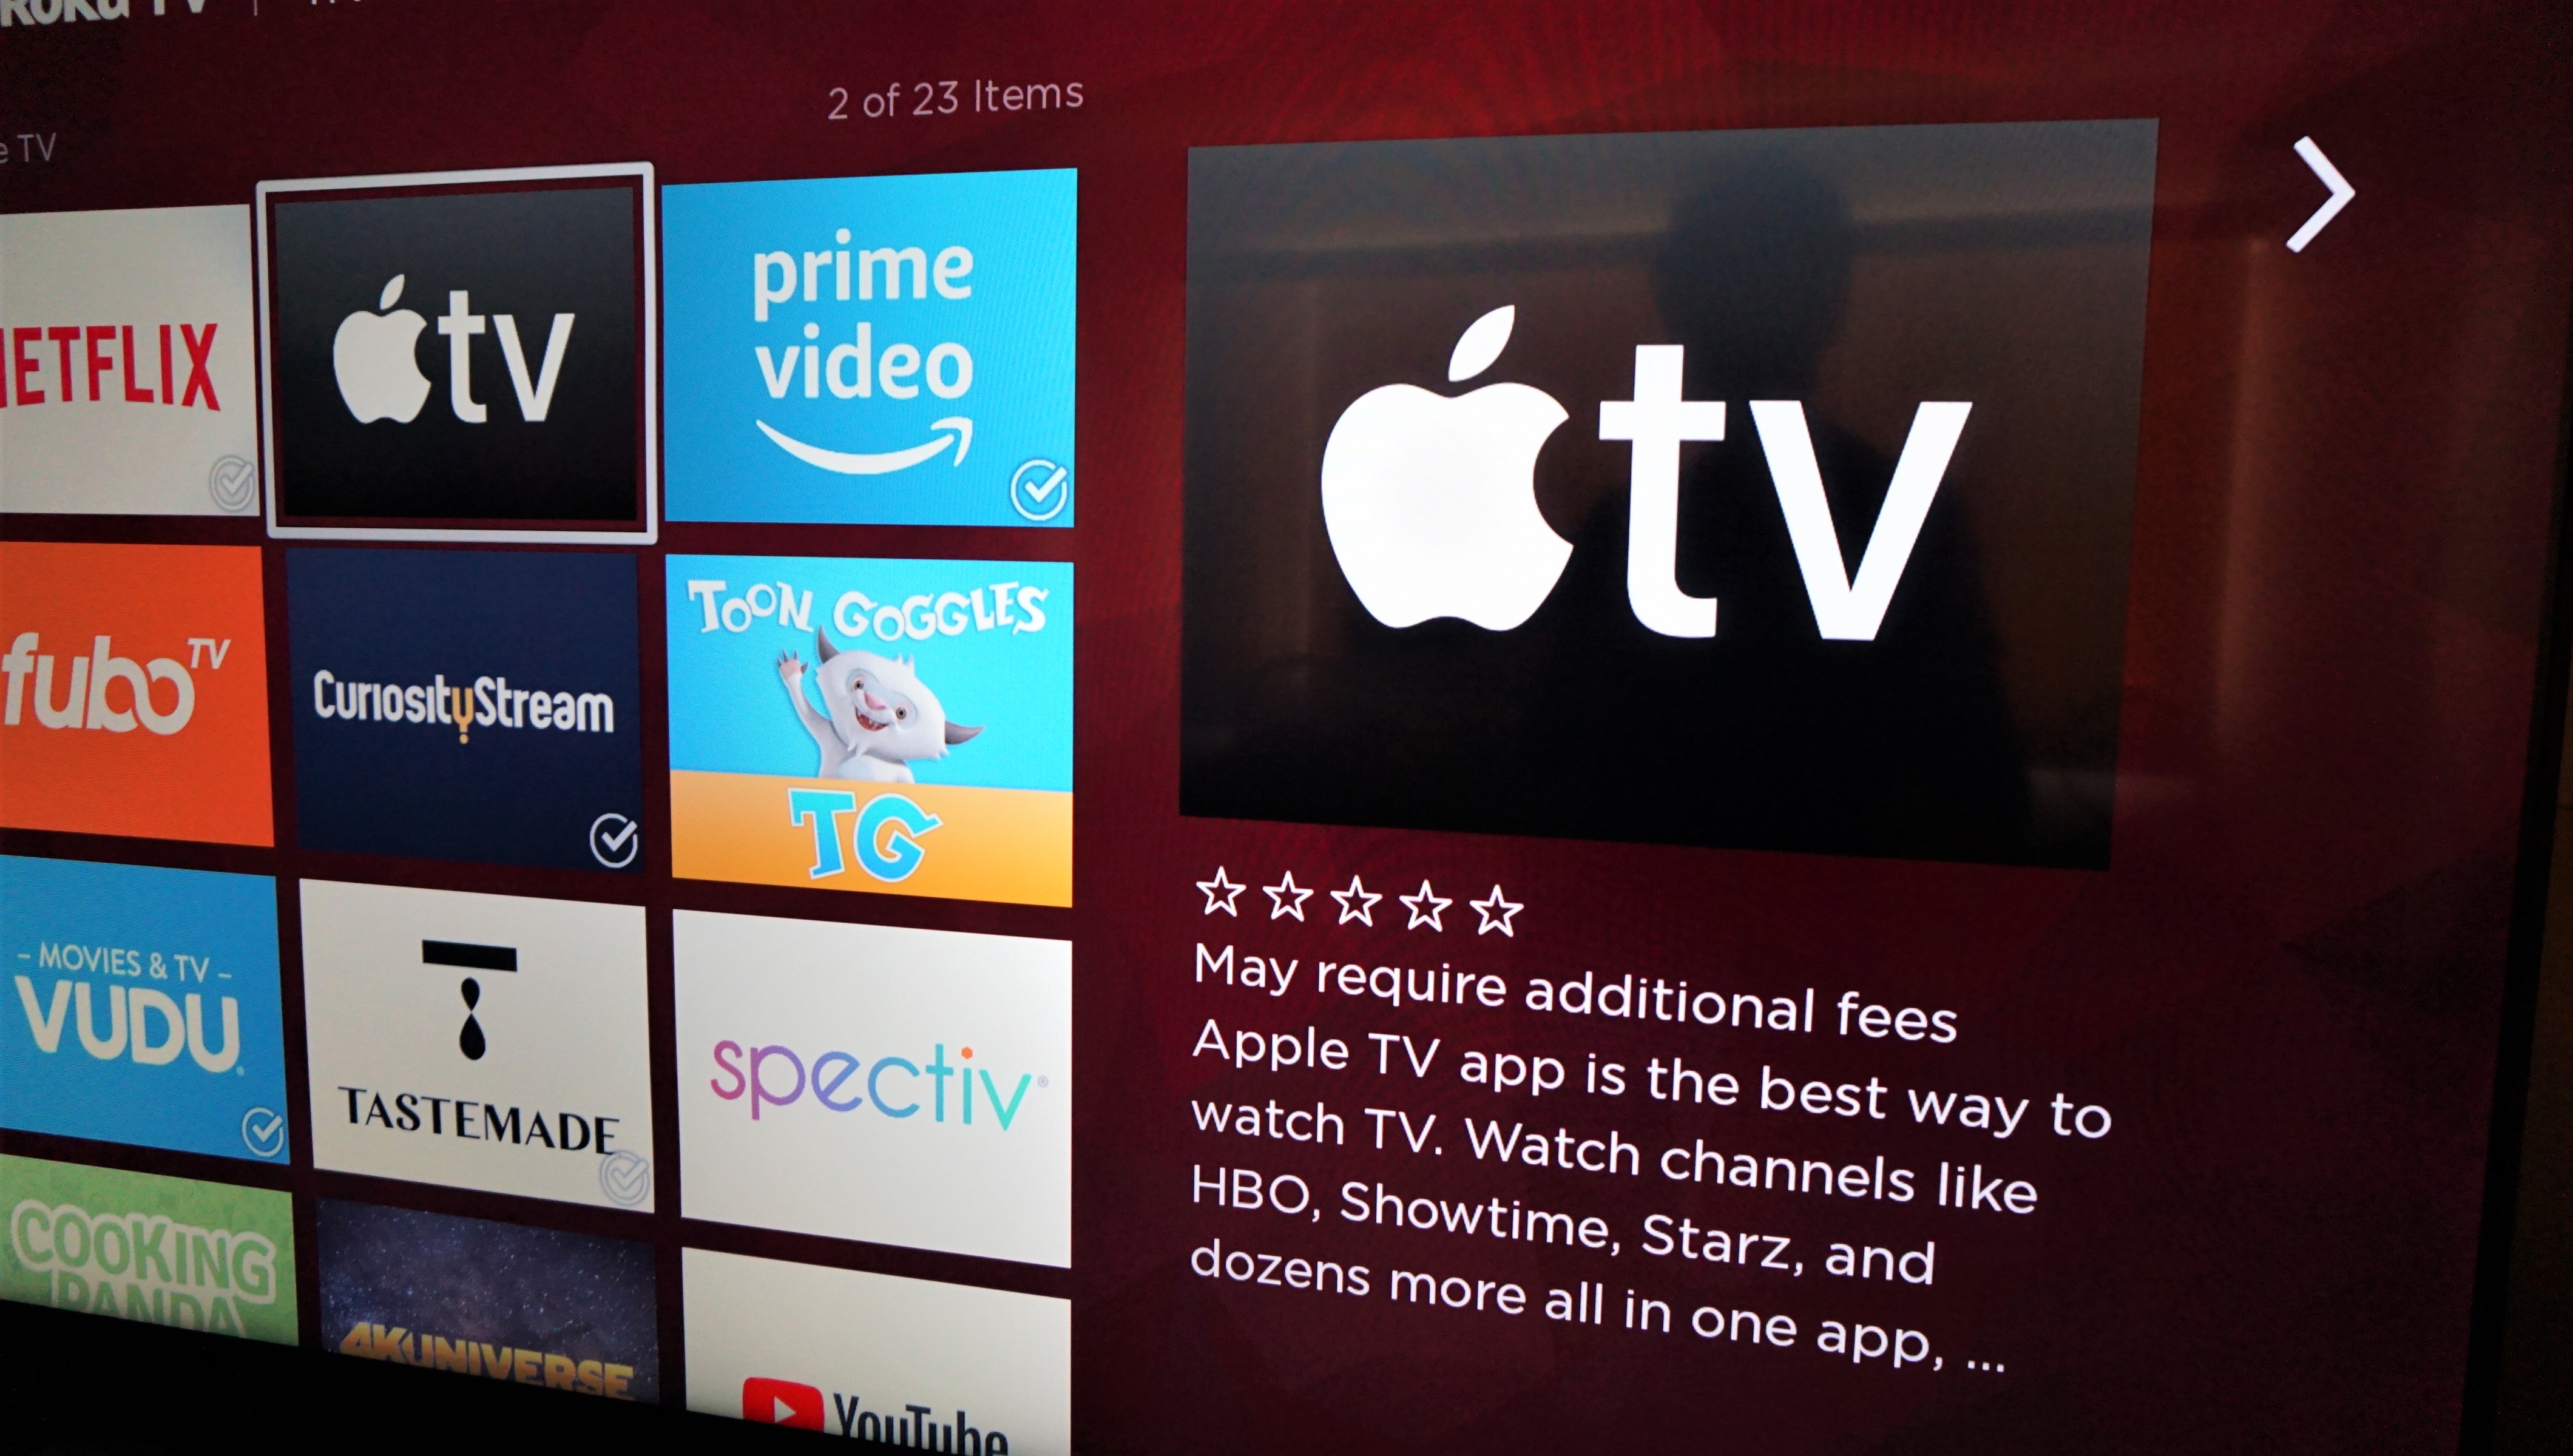 Apple TV app is now available on Amazon Fire TV devices in the UK TechRadar